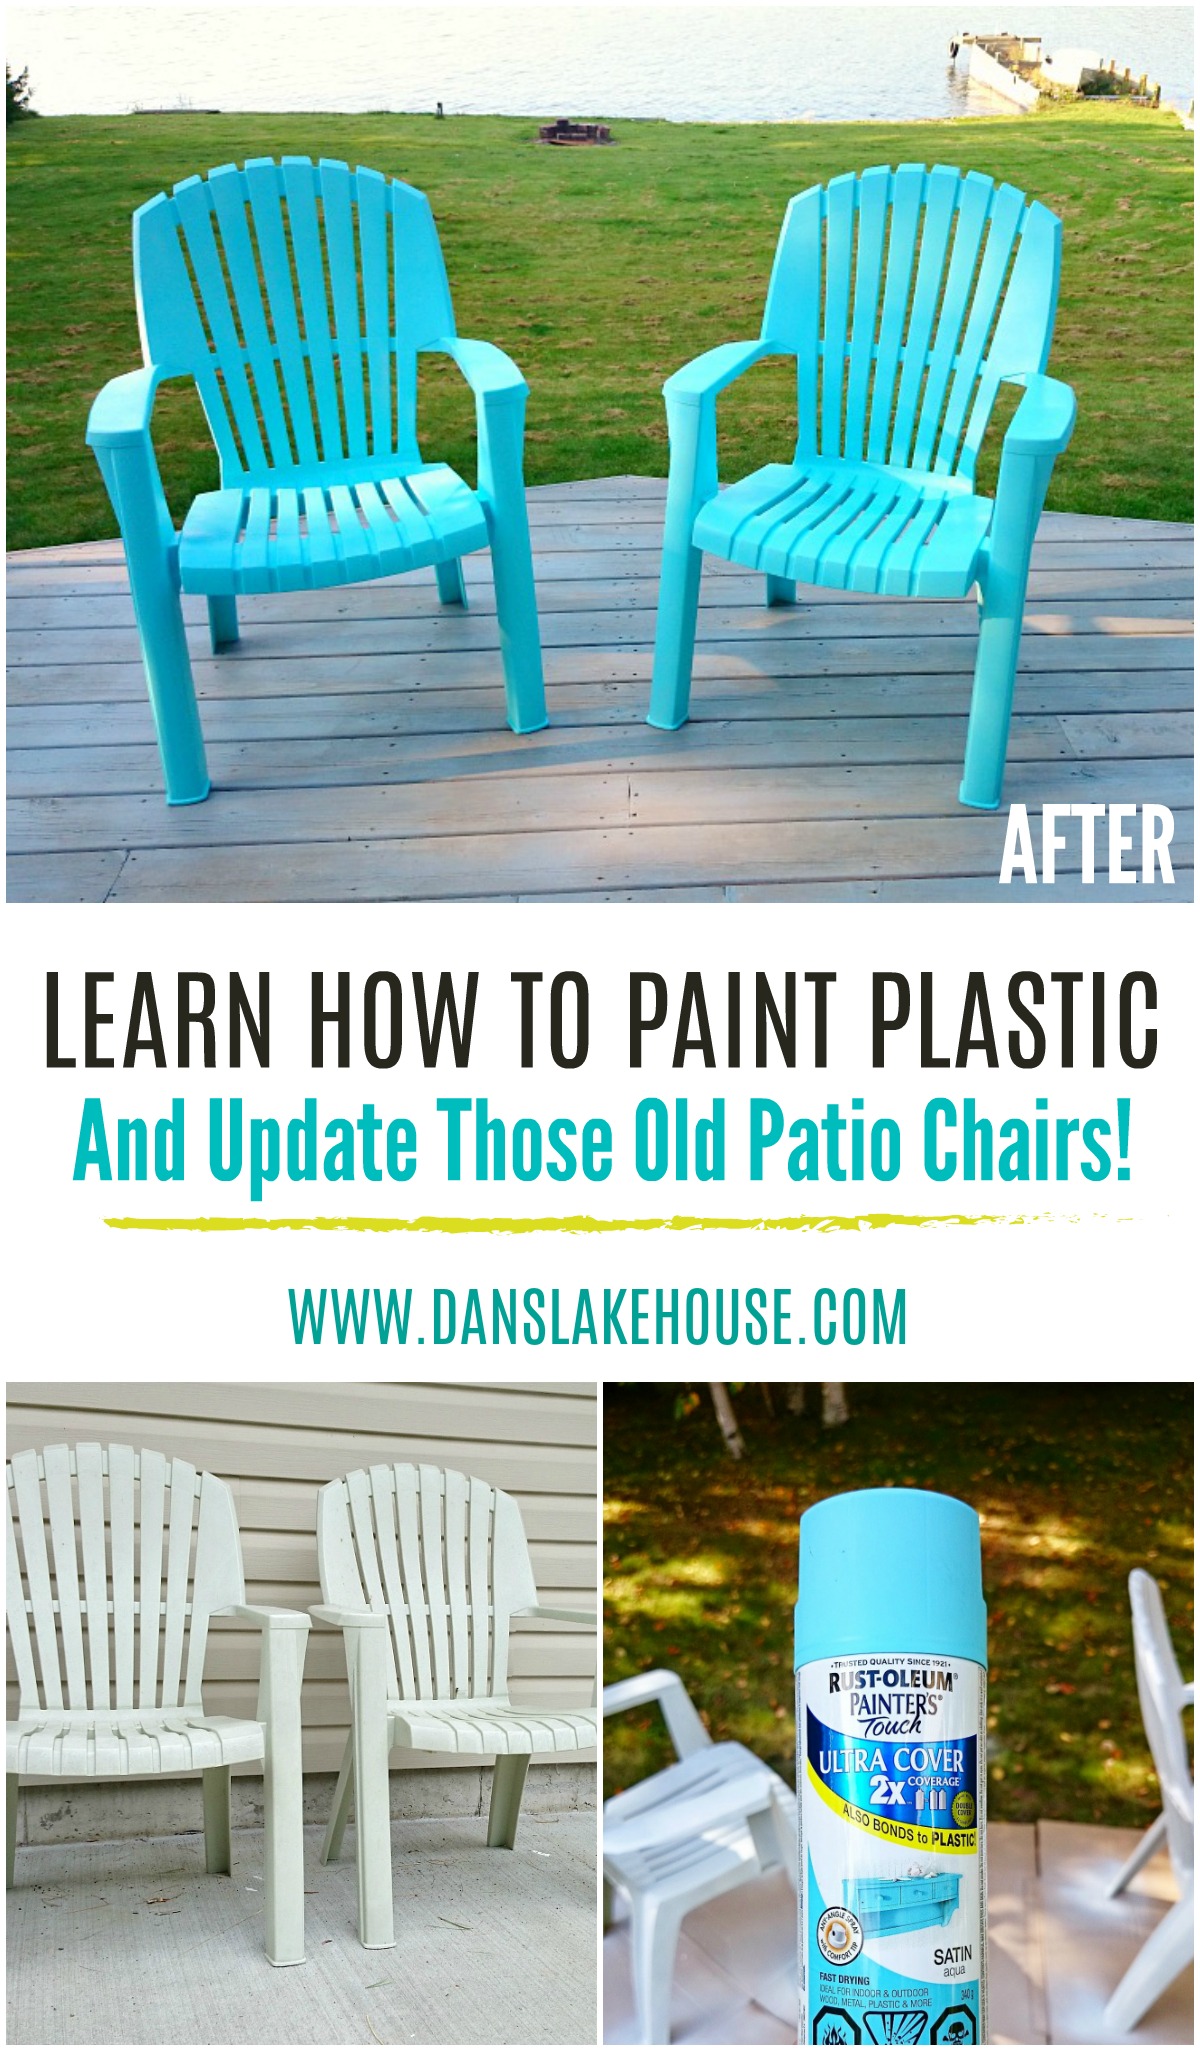 How to Spray Paint Plastic Lawn Chairs | Dans le Lakehouse